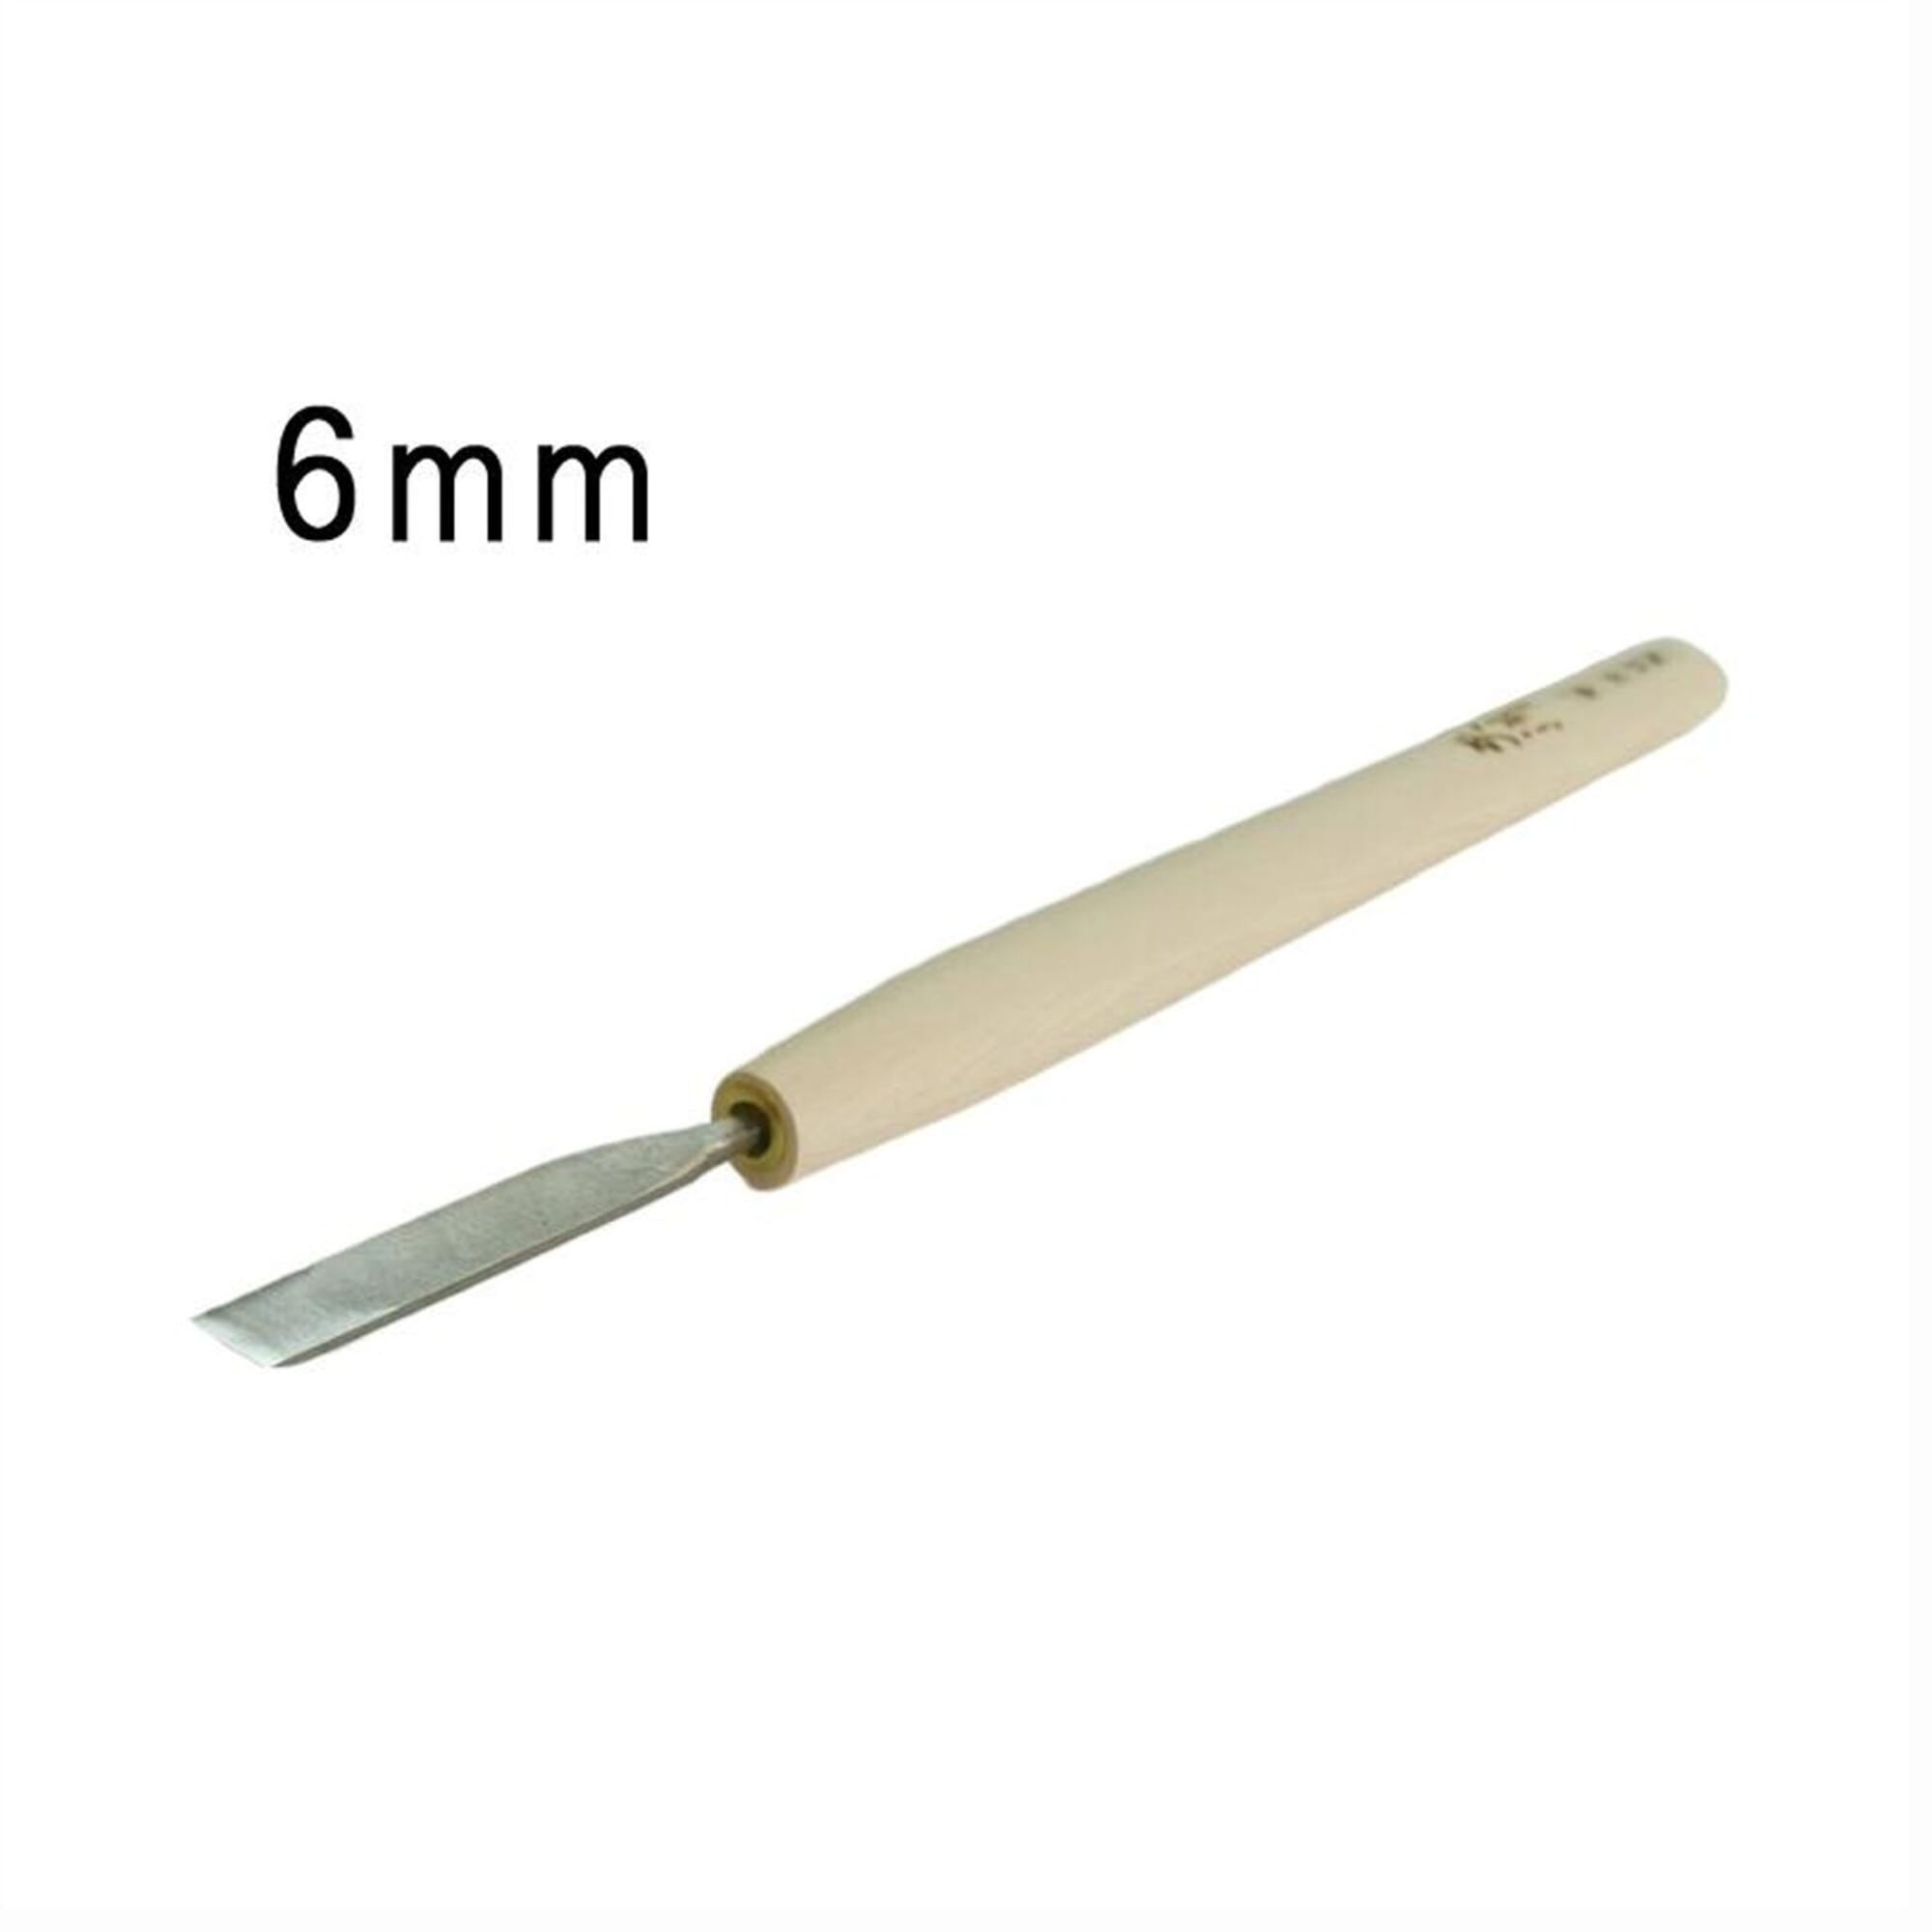 1pc Carpenter Carving Knife Wood Carving Flat Chisel For Woodcut